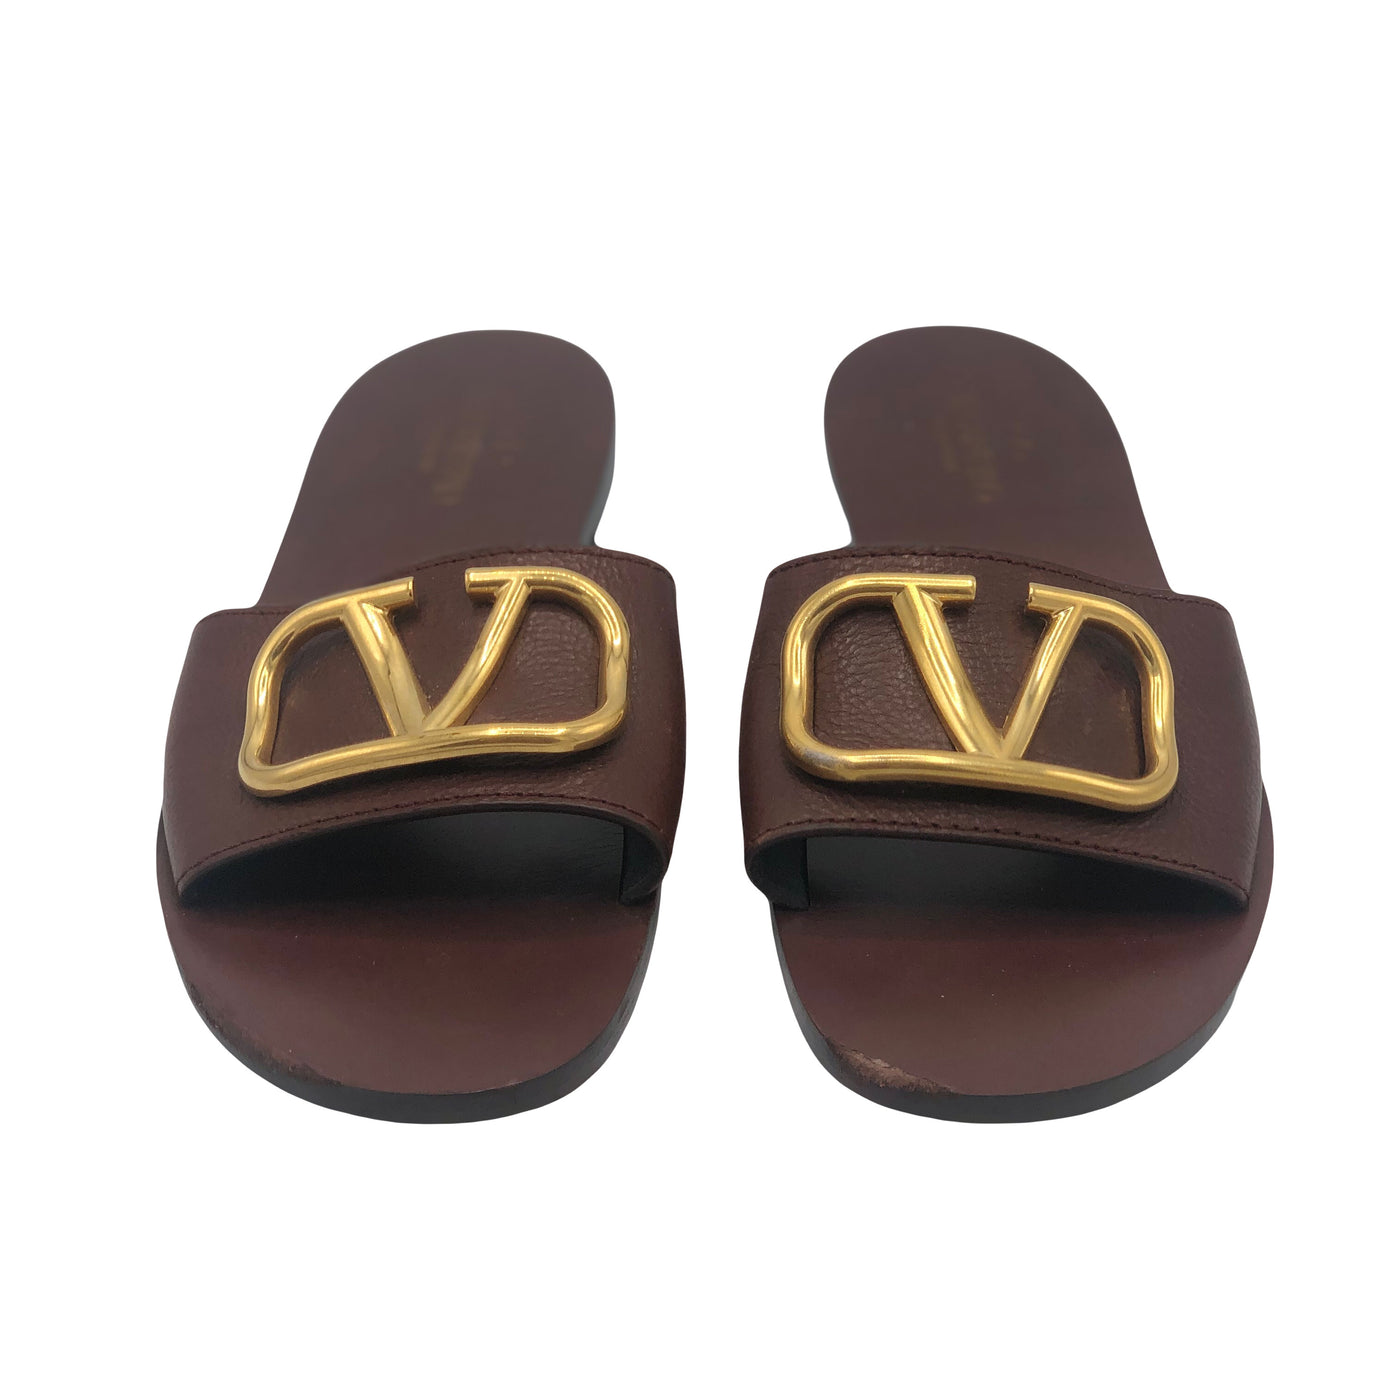 VALENTINO Brown leather flats with gold “V” size 37.5